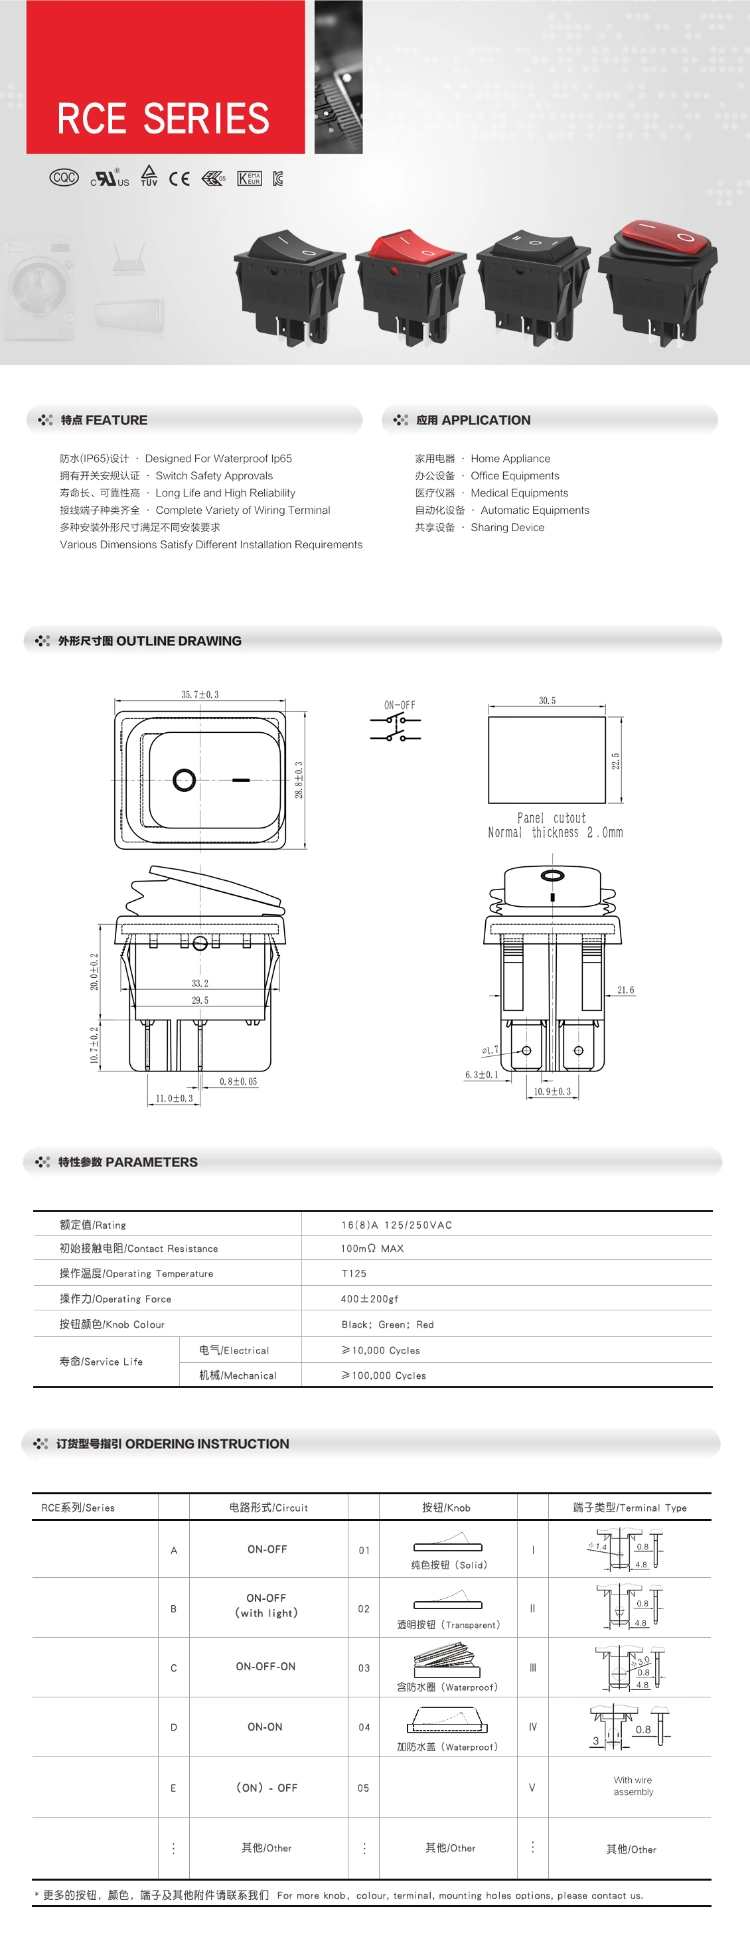 Manufacturer Kcd4 Waterproof IP65 Rocker Switch 16 (8) a 125/250VAC 1e4 on-off Electrical Control Switch